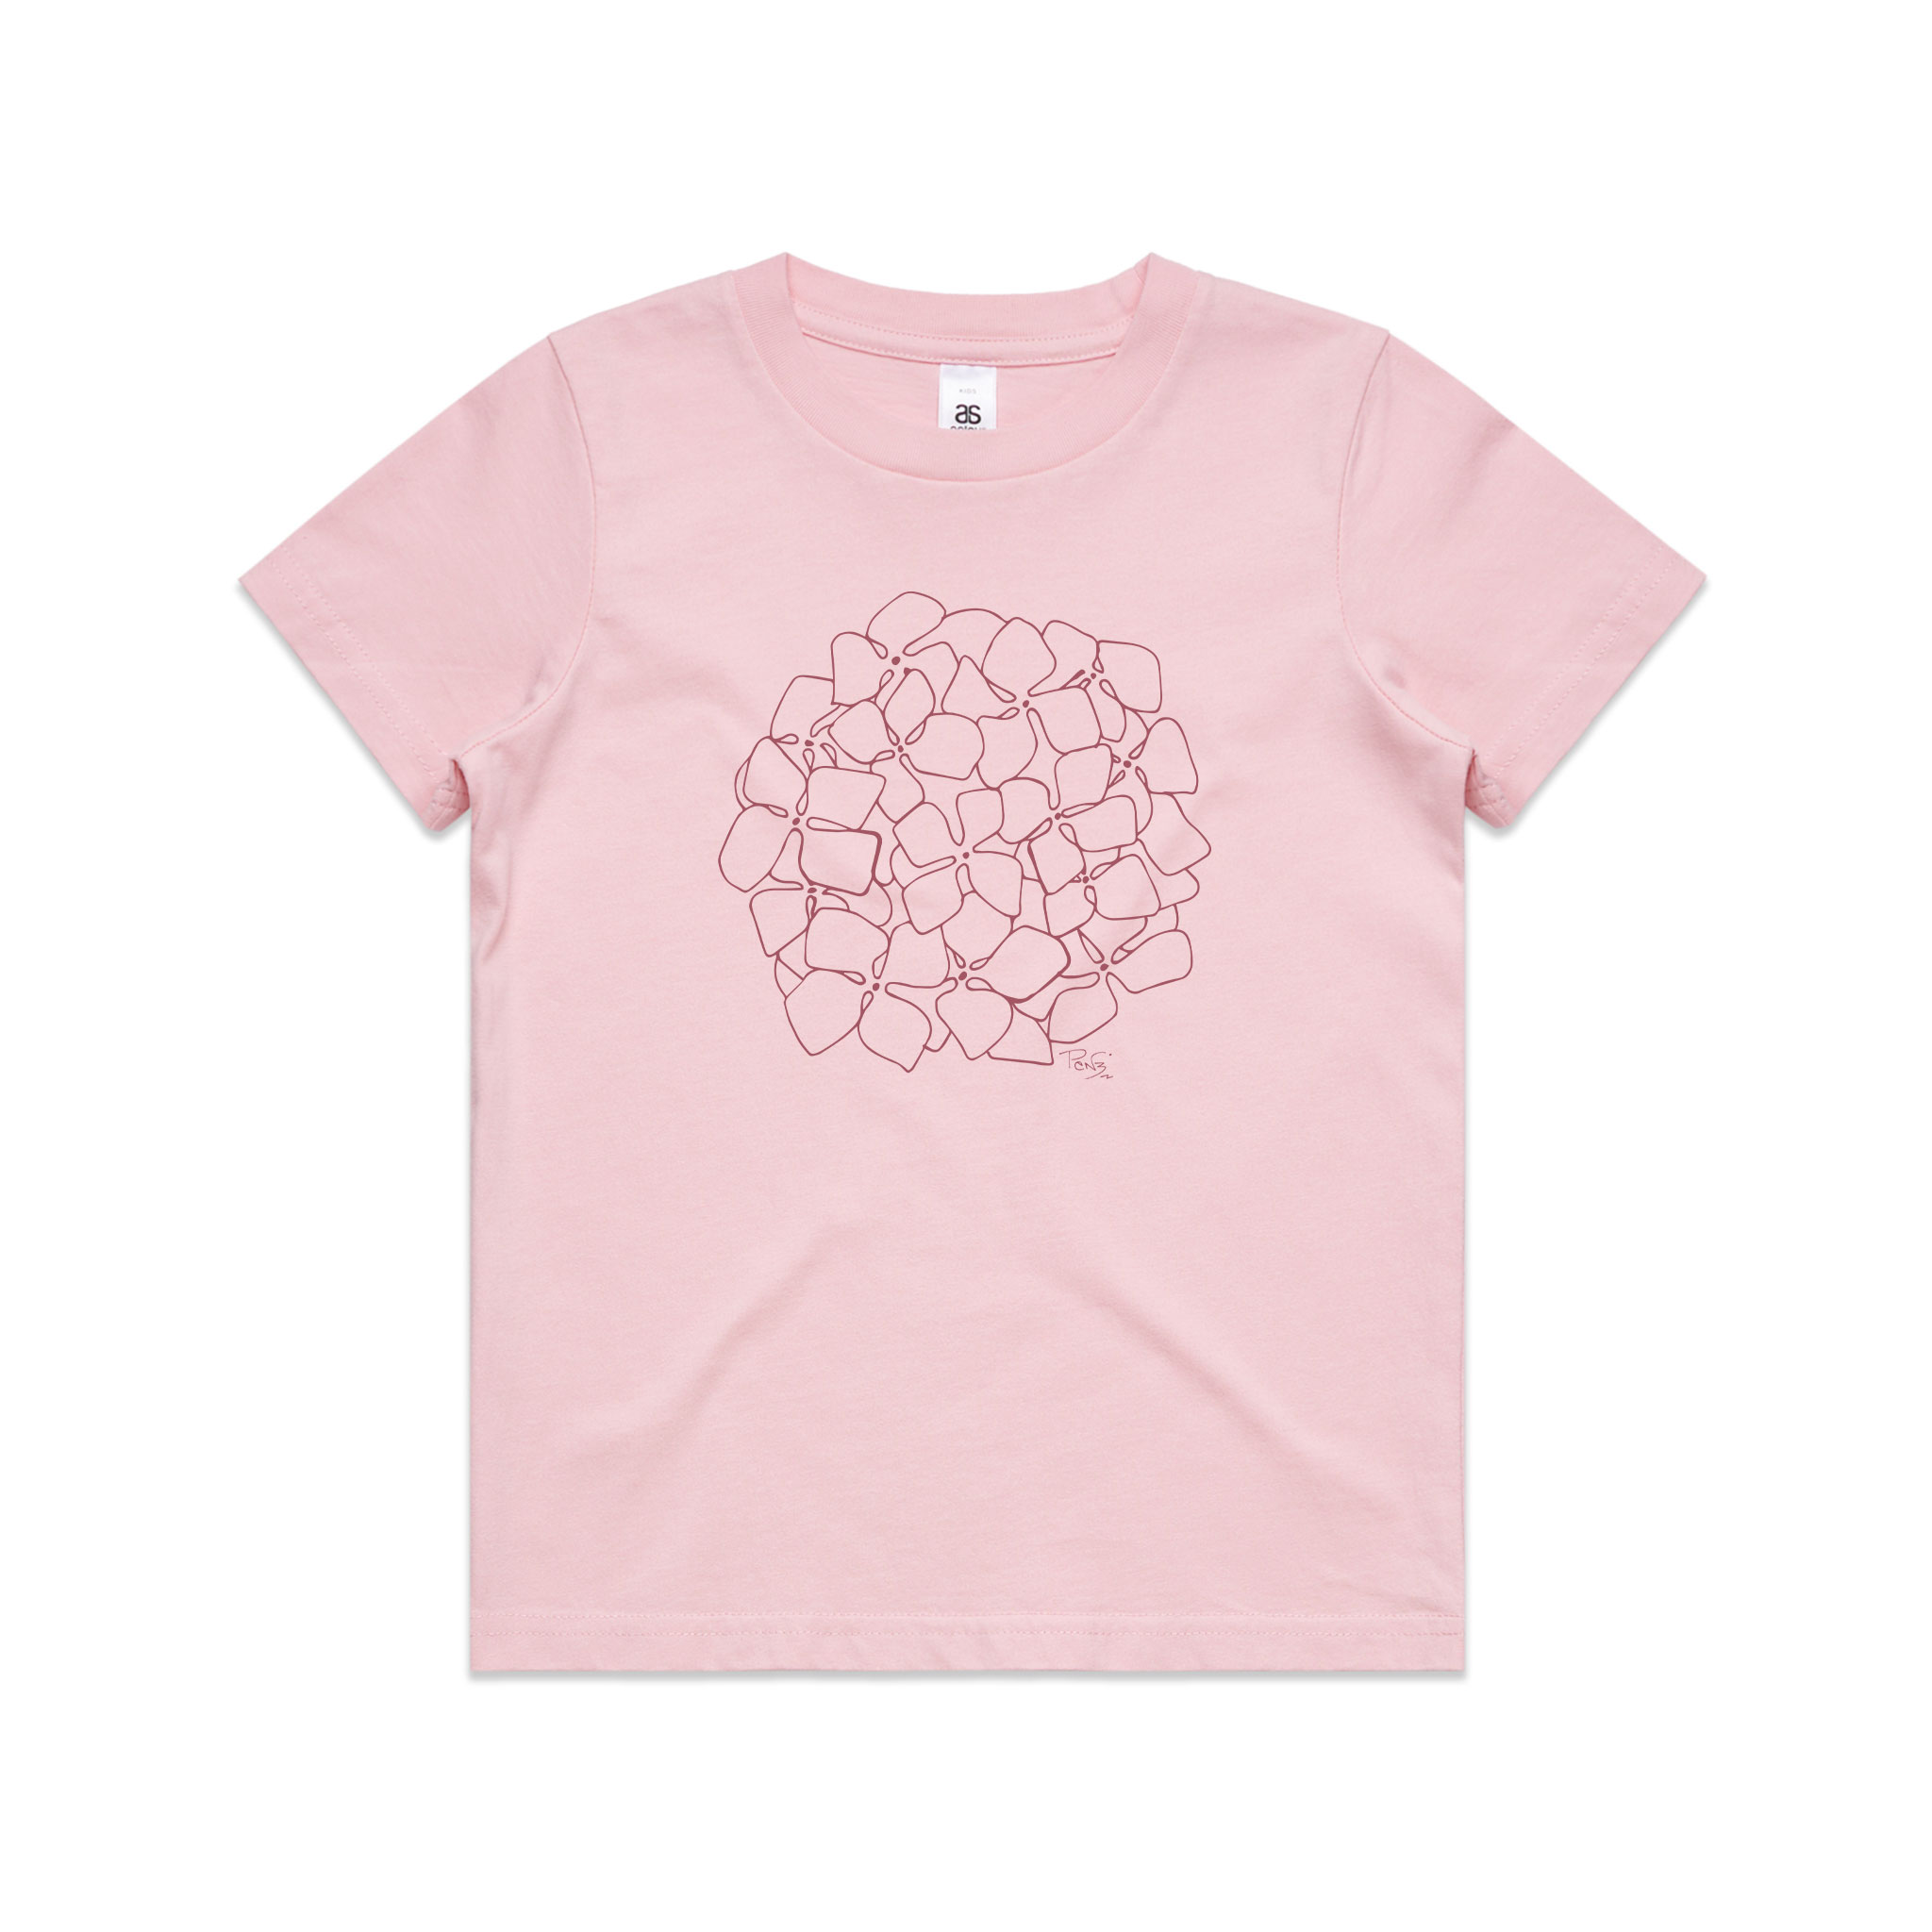 mums garden collection, collections, hydrangea outline kids tee, pink